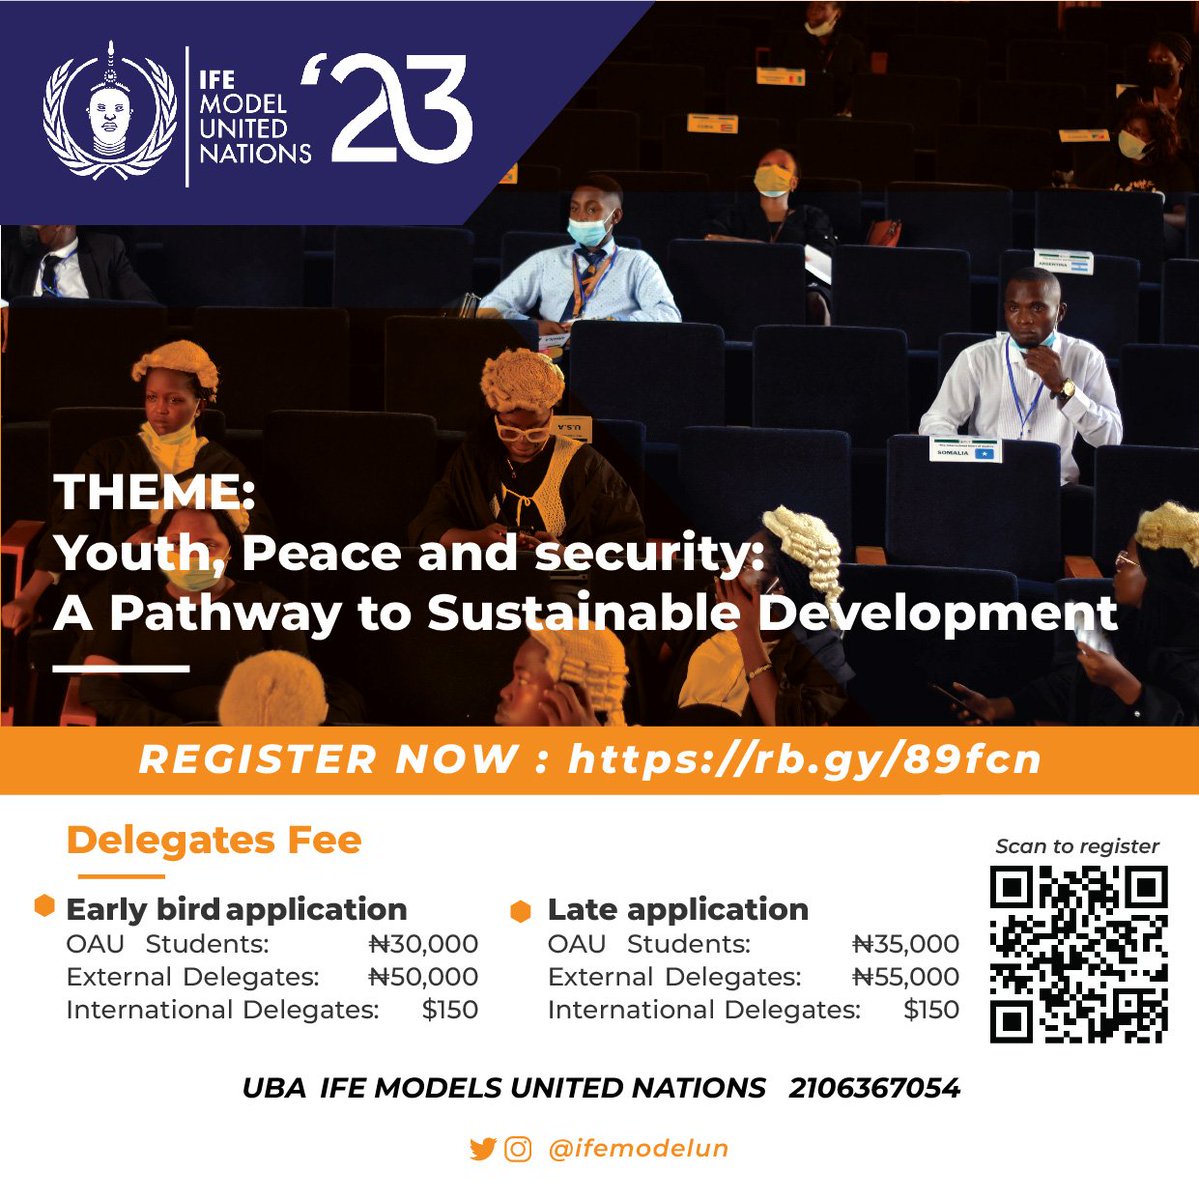 “Youth, Peace and security: A Pathway to Sustainable Development”
Join us as a delegate this IFEMUN Conference.

Registration opens today at bit.ly/IFEMUN_2023_De…. 

#IFEMUN23 
#YOUTHPEACEANDSECURITY